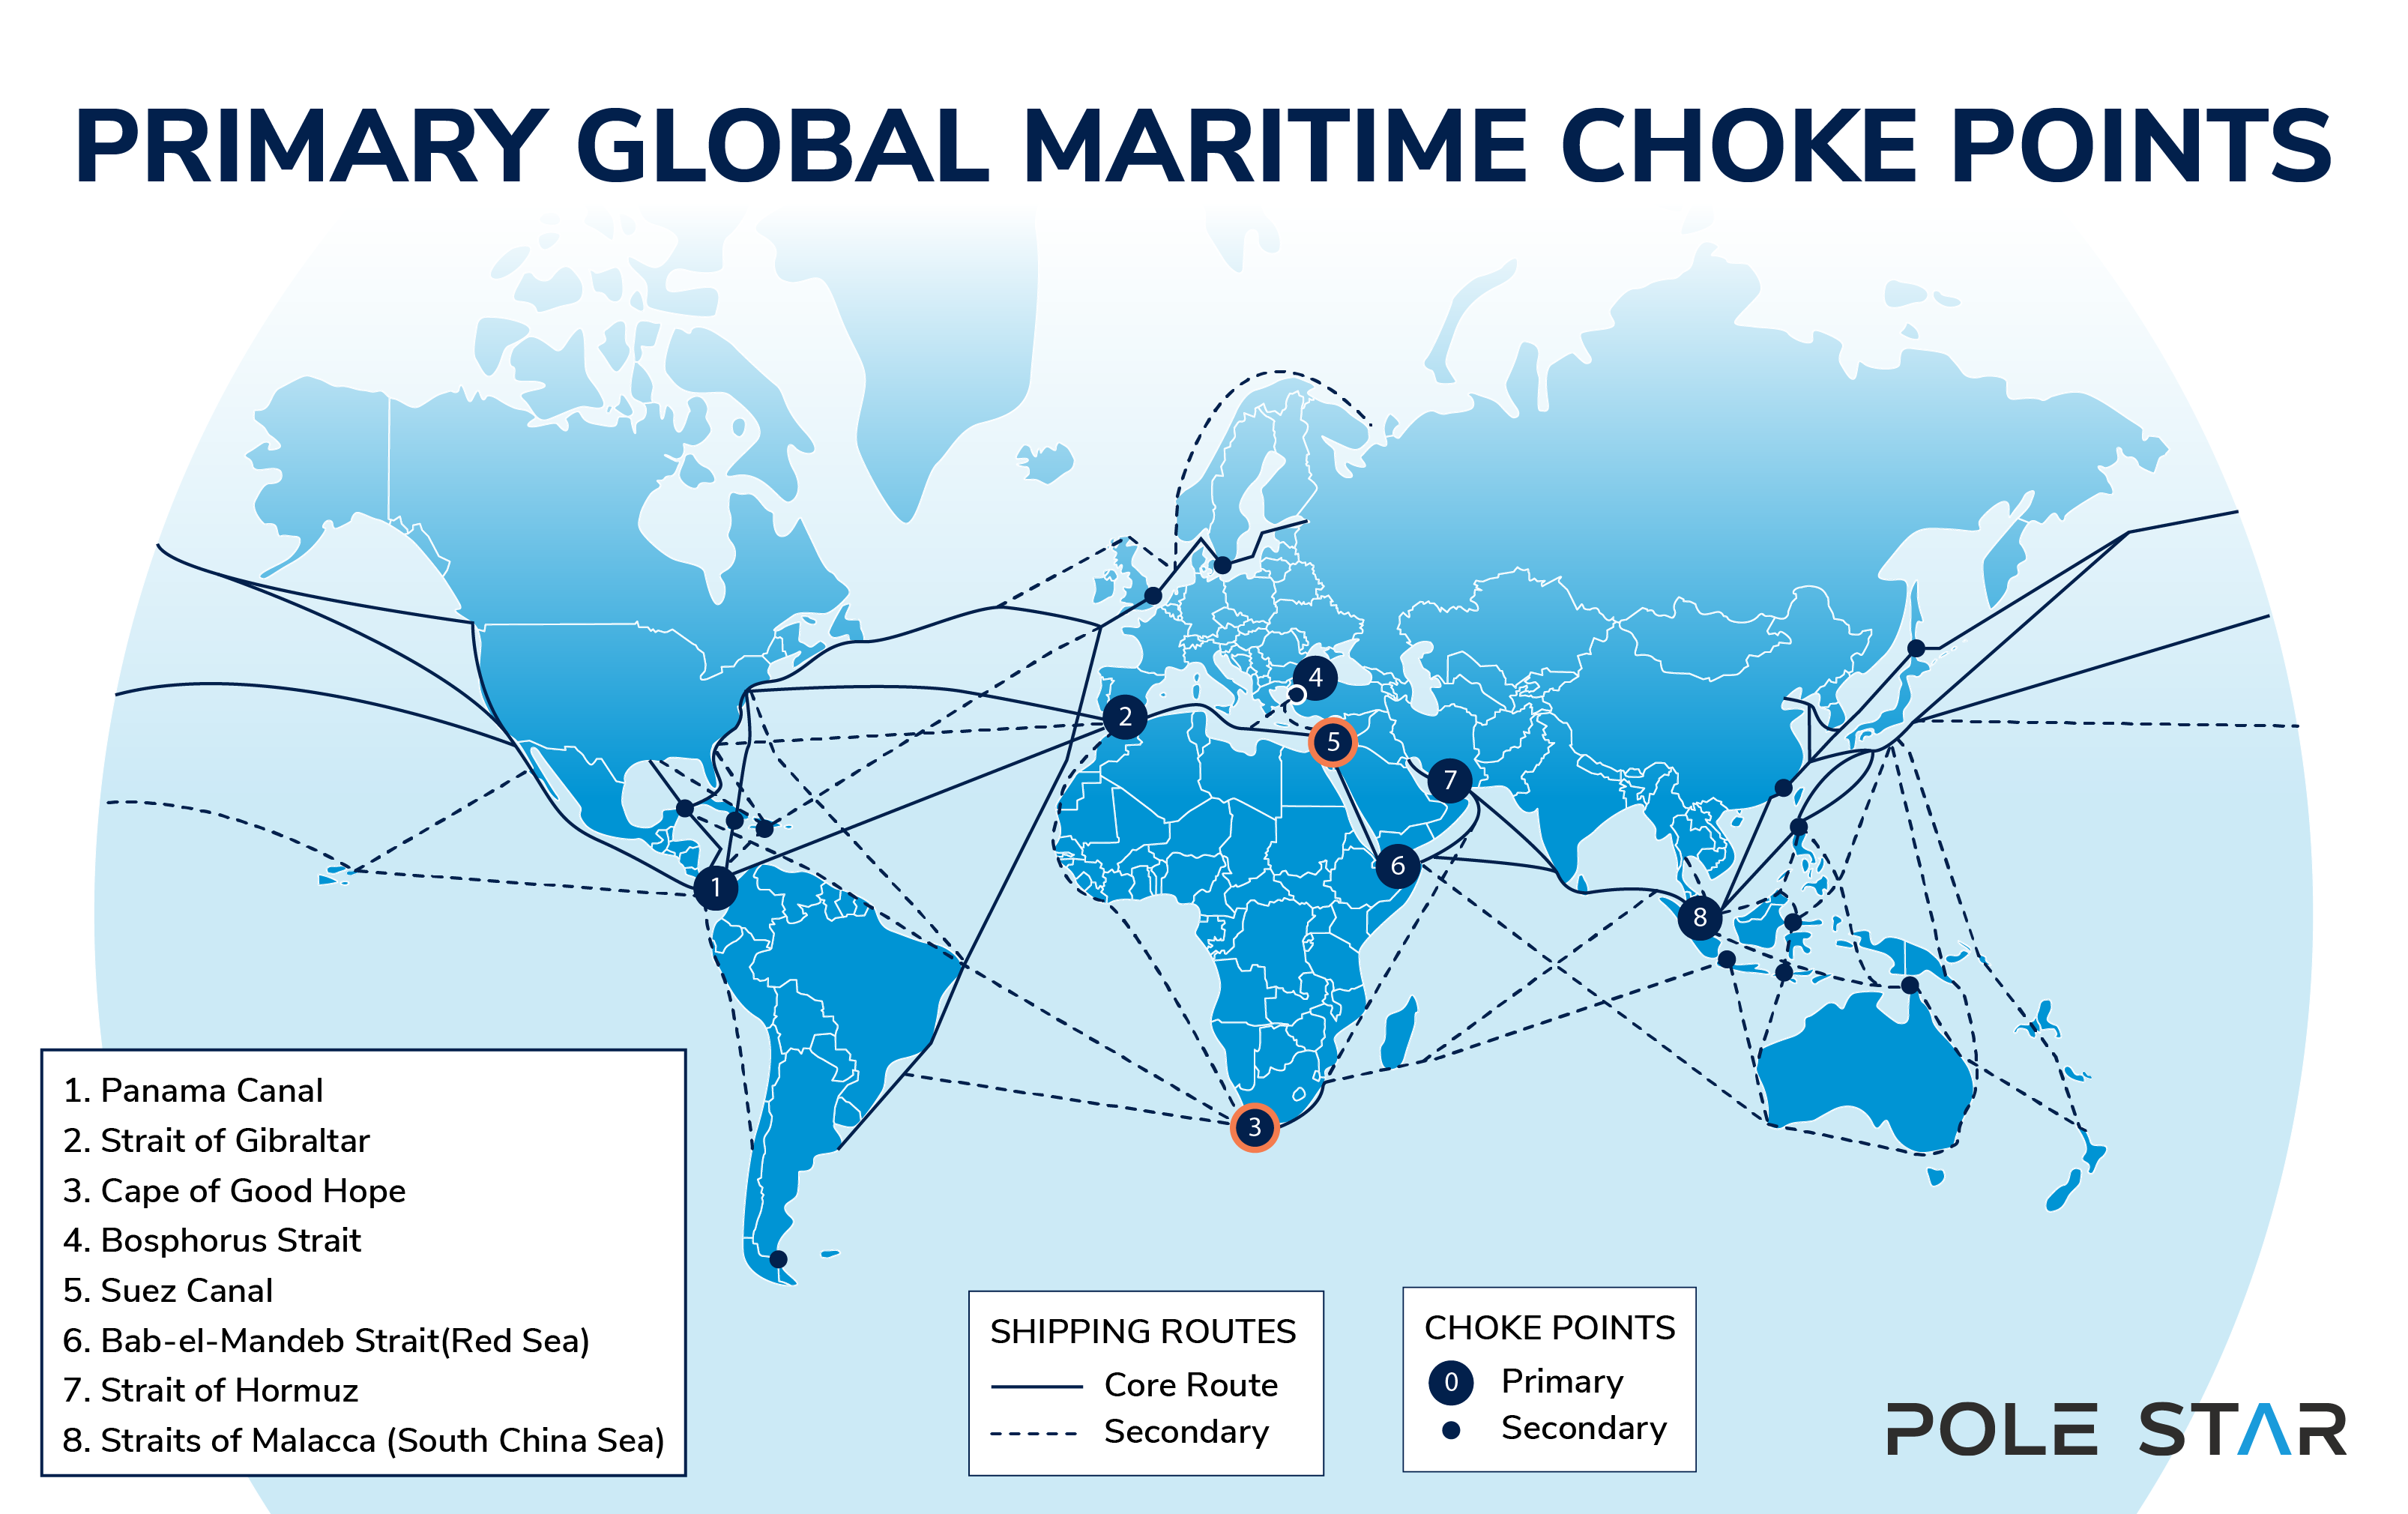 maritime choke points highlighting the Suez Canal and Cape of Good Hope